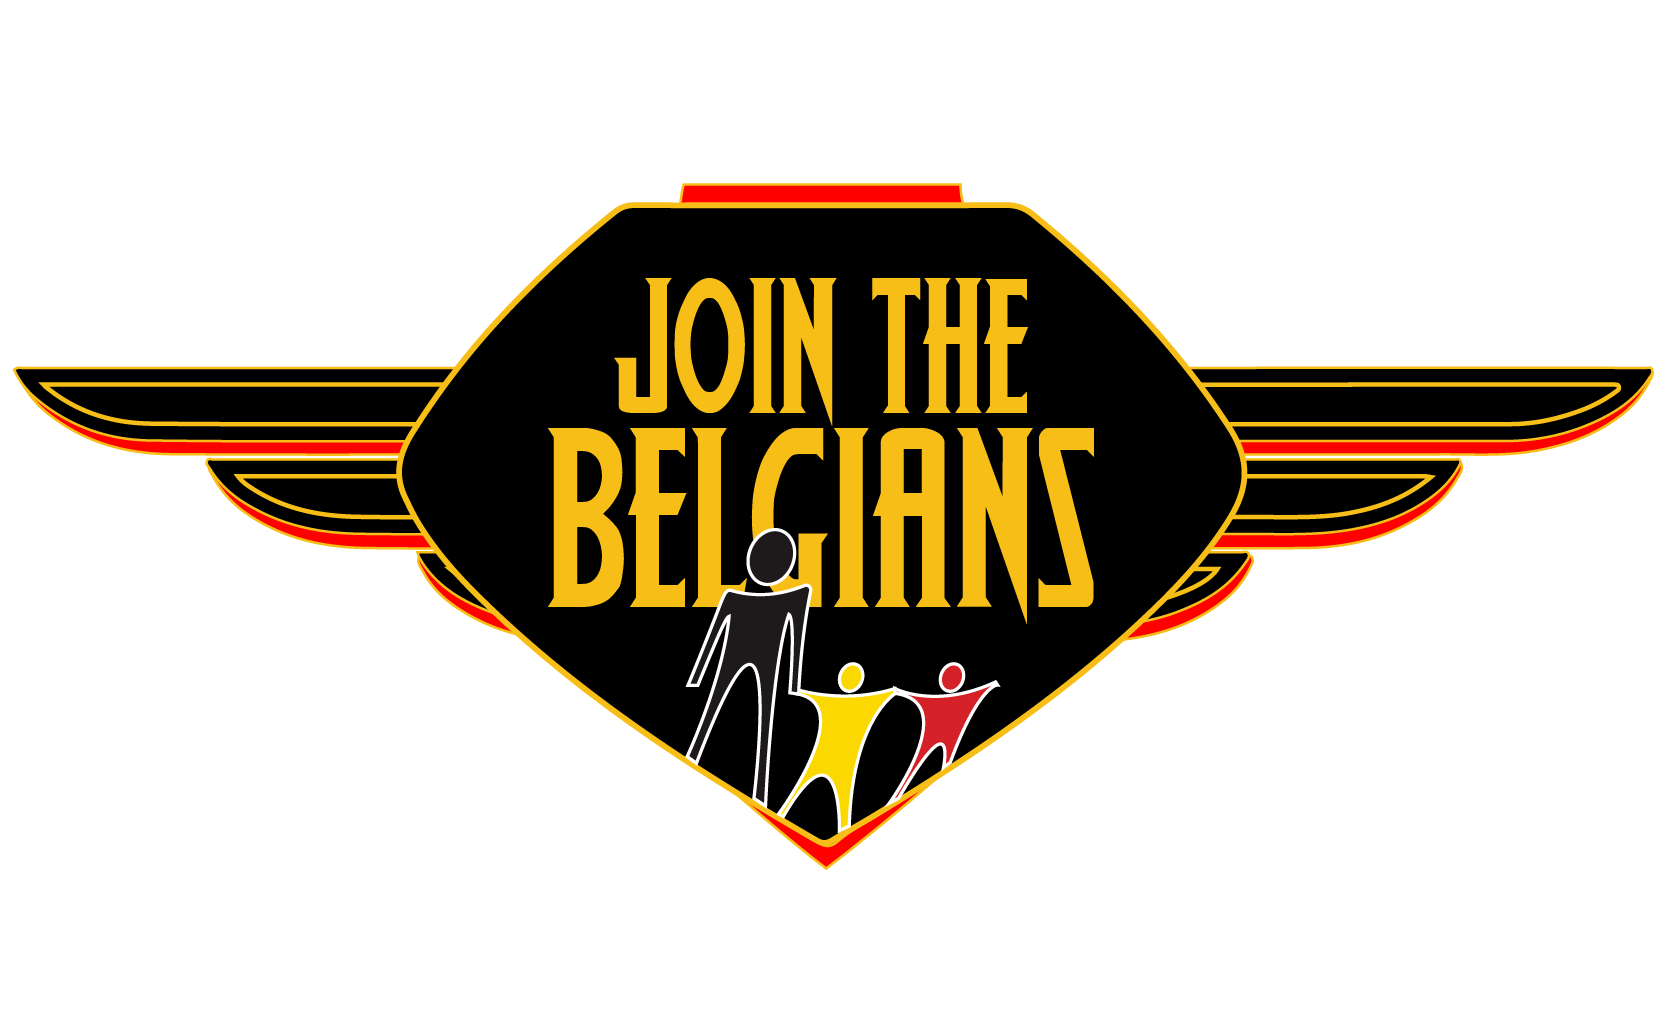 #JointheBelgians